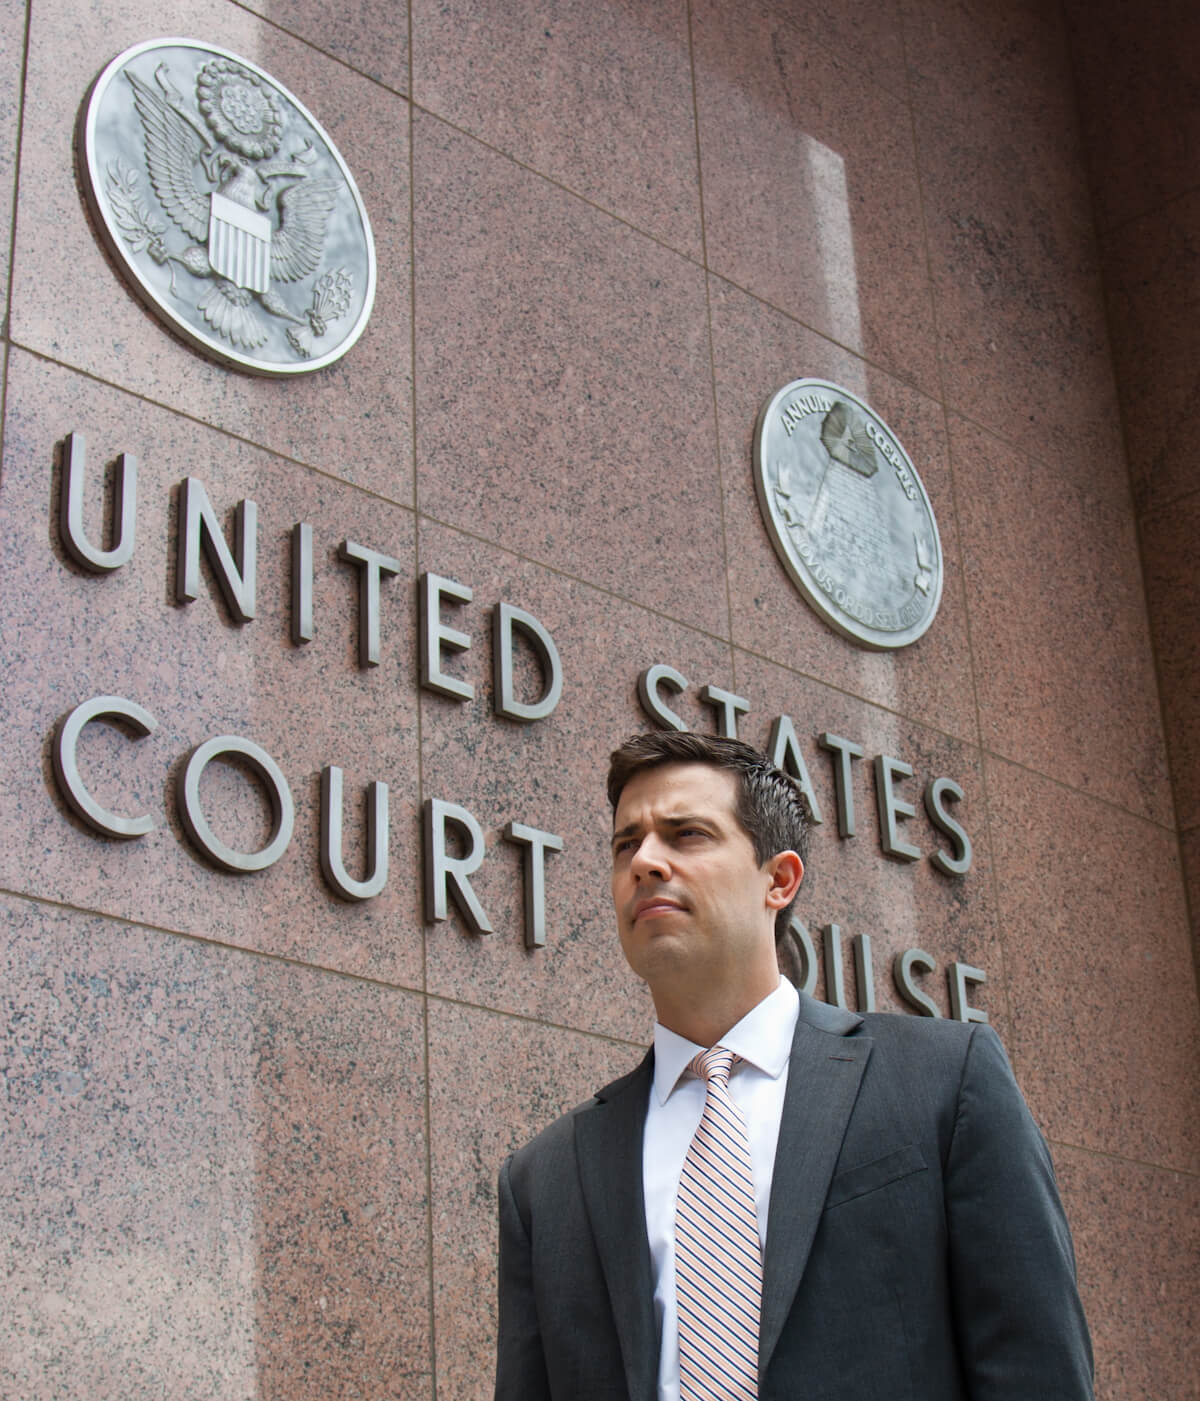 A picture of a skipper at the united states court house